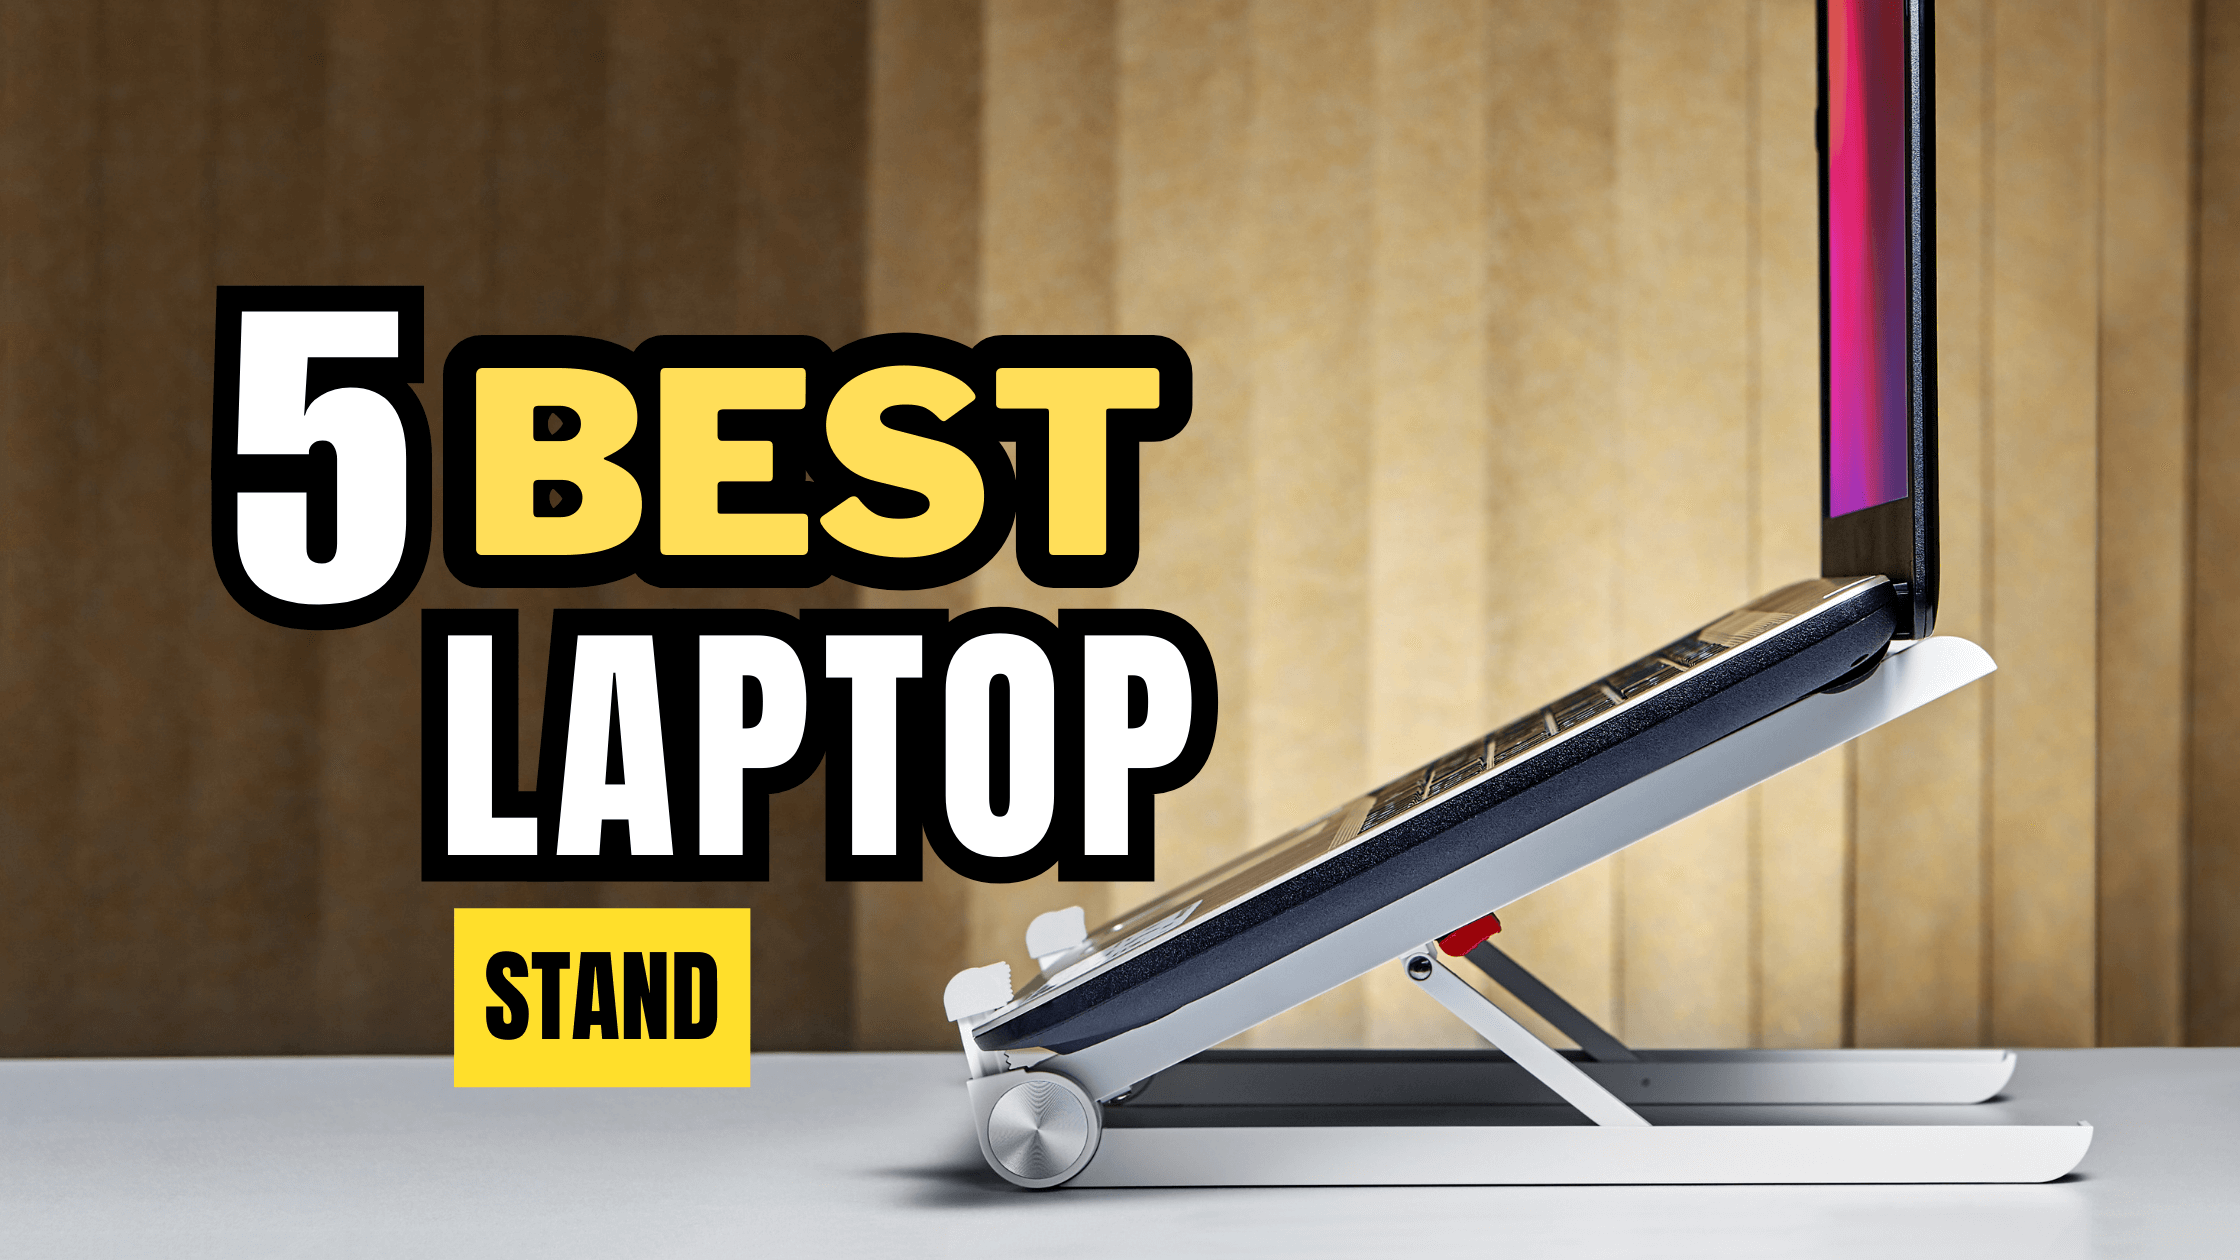 5 best laptop stand in india